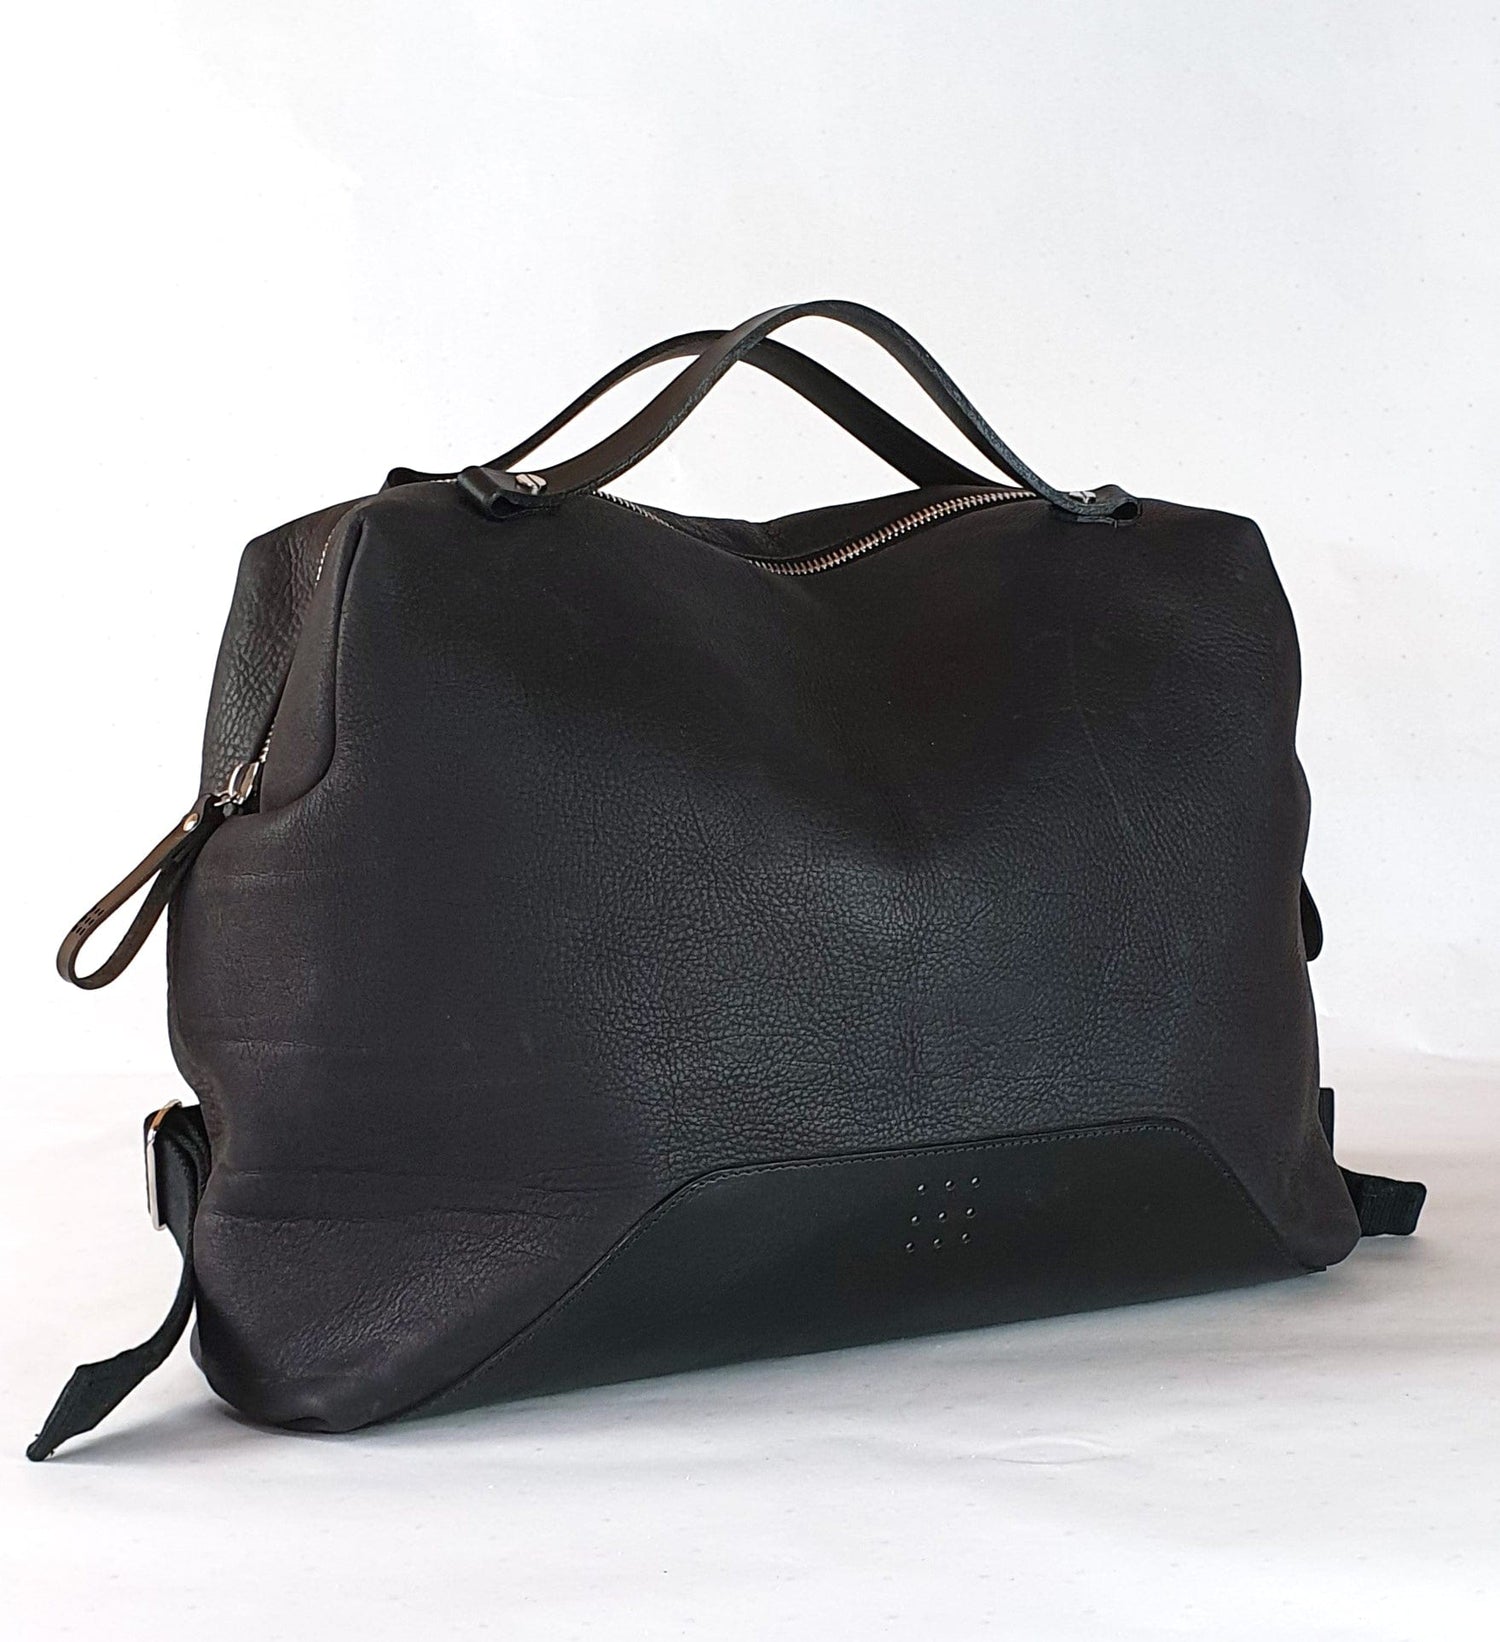 Hands of Tym Luggage & Bags 'Rowan' Bespoke Handmade Luxury Leather Backpack Holdall With Zip Closure and Top Handles